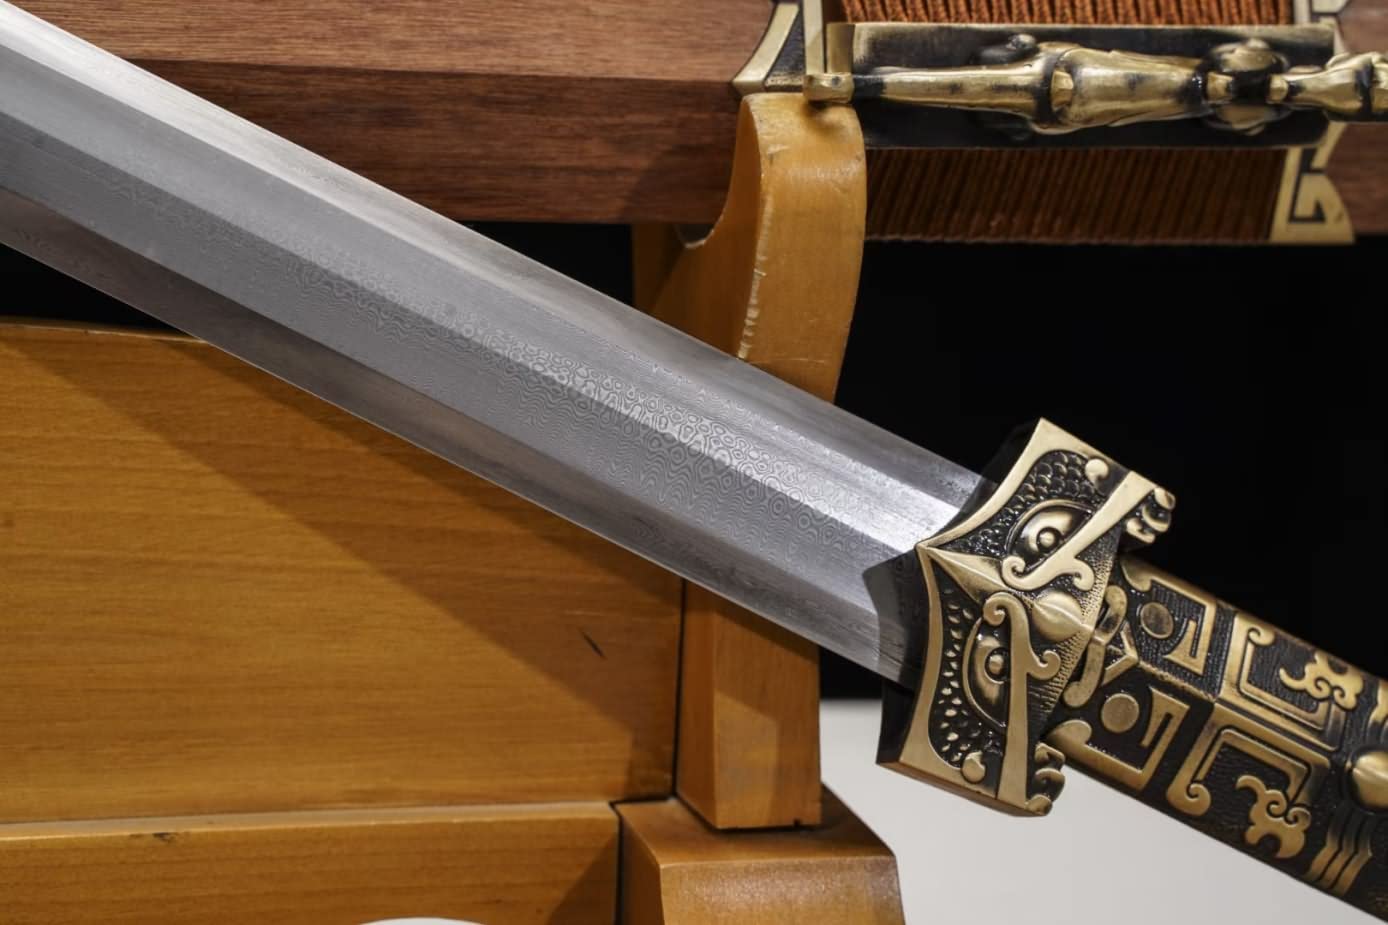 Han jian,Damascus Steel octahedral Blades,Brass Fittings,Two Scabbard Materials